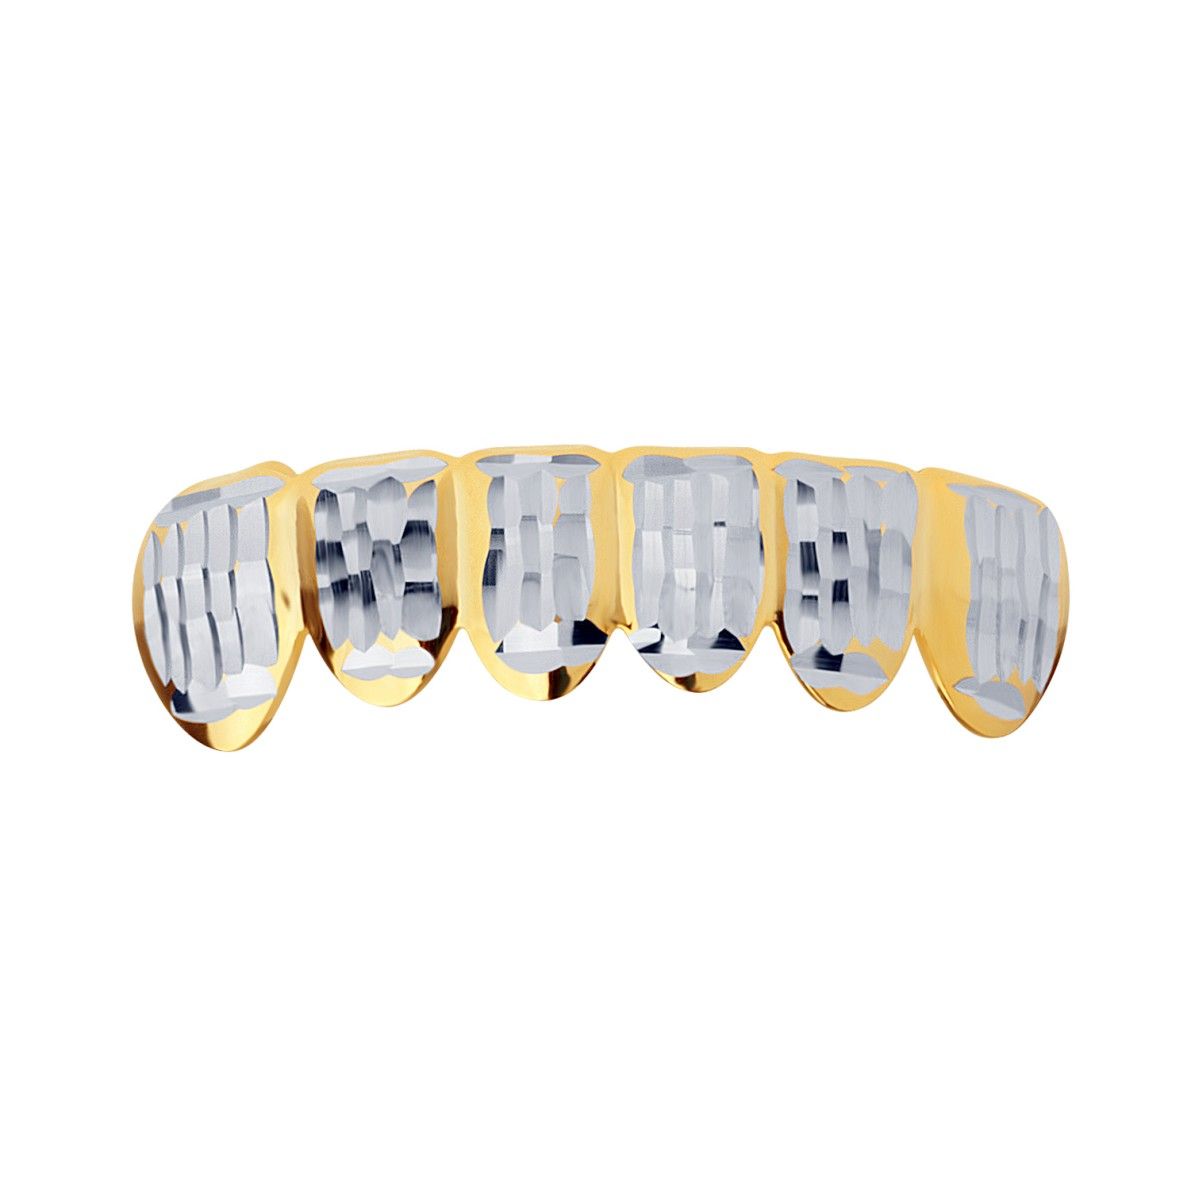 Gold Grillz – One size fits all – Diamond Cut ONE – Bottom